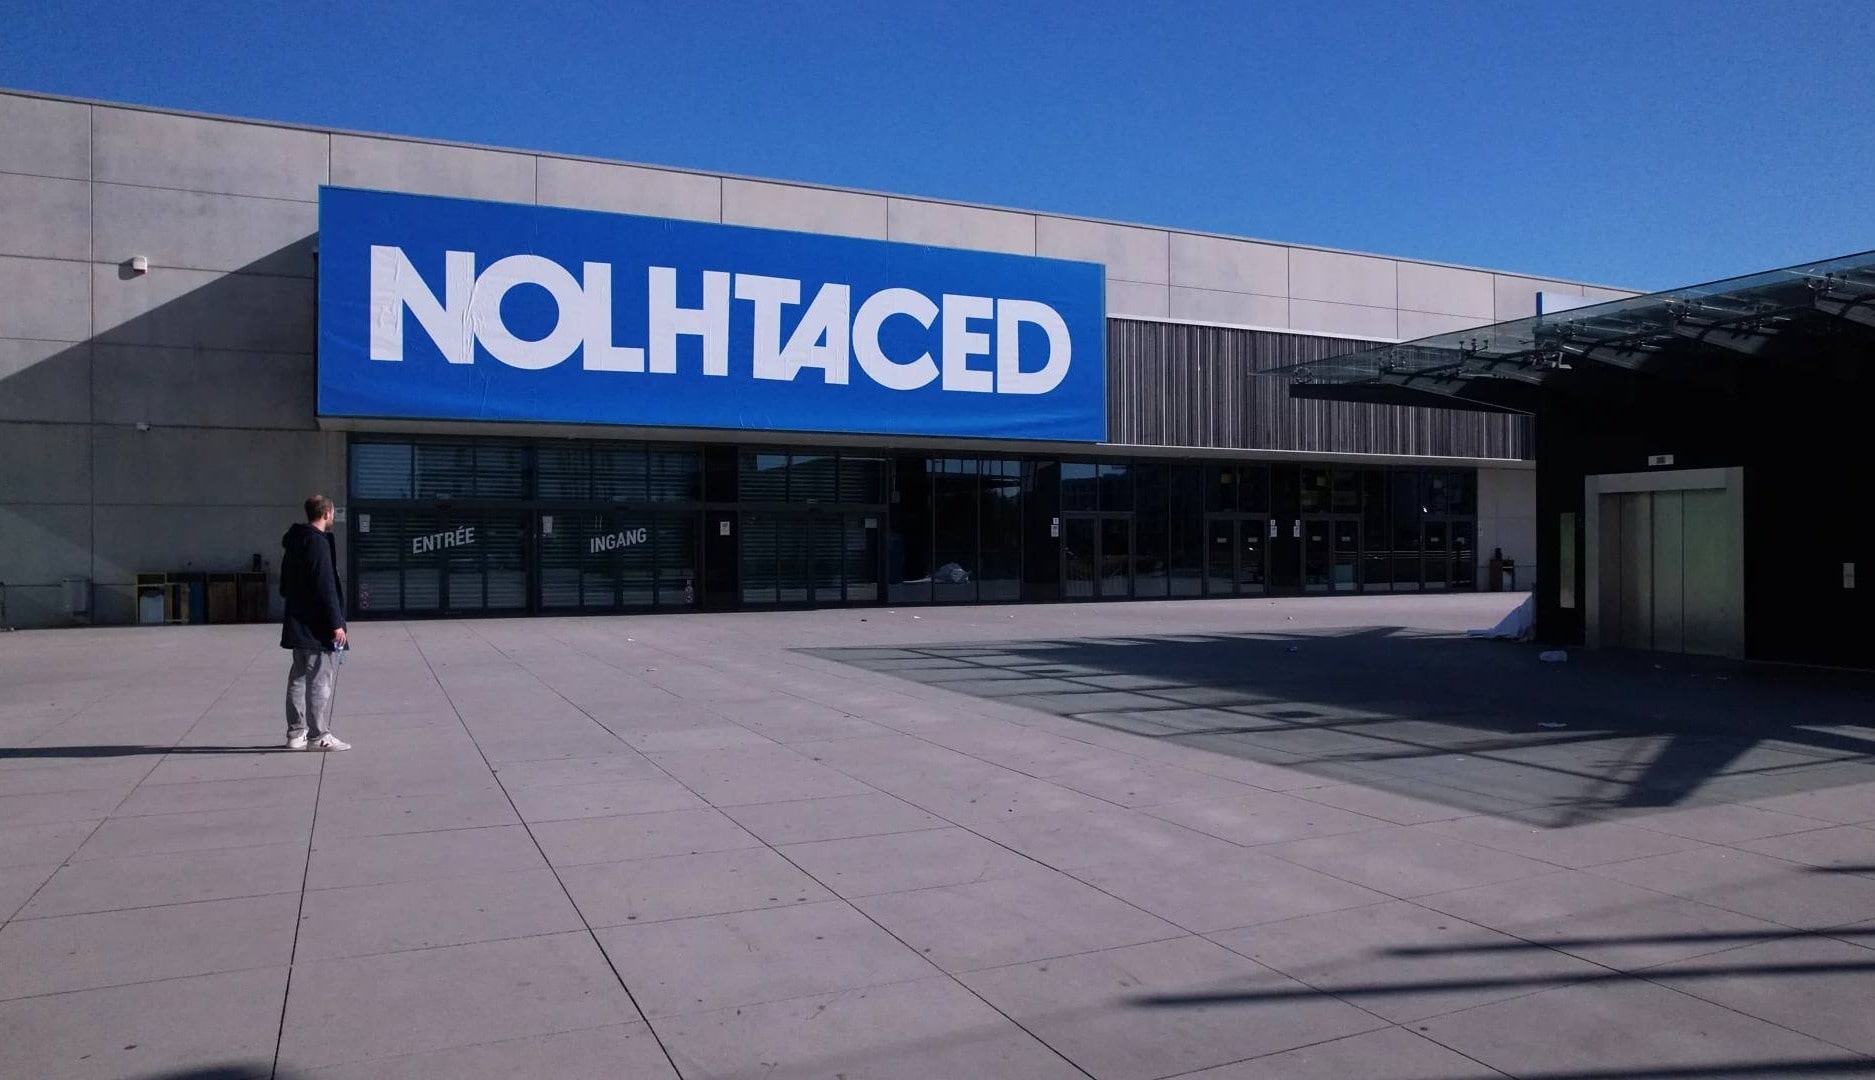 Decathlon changes name to Nolhtaced sustainability news